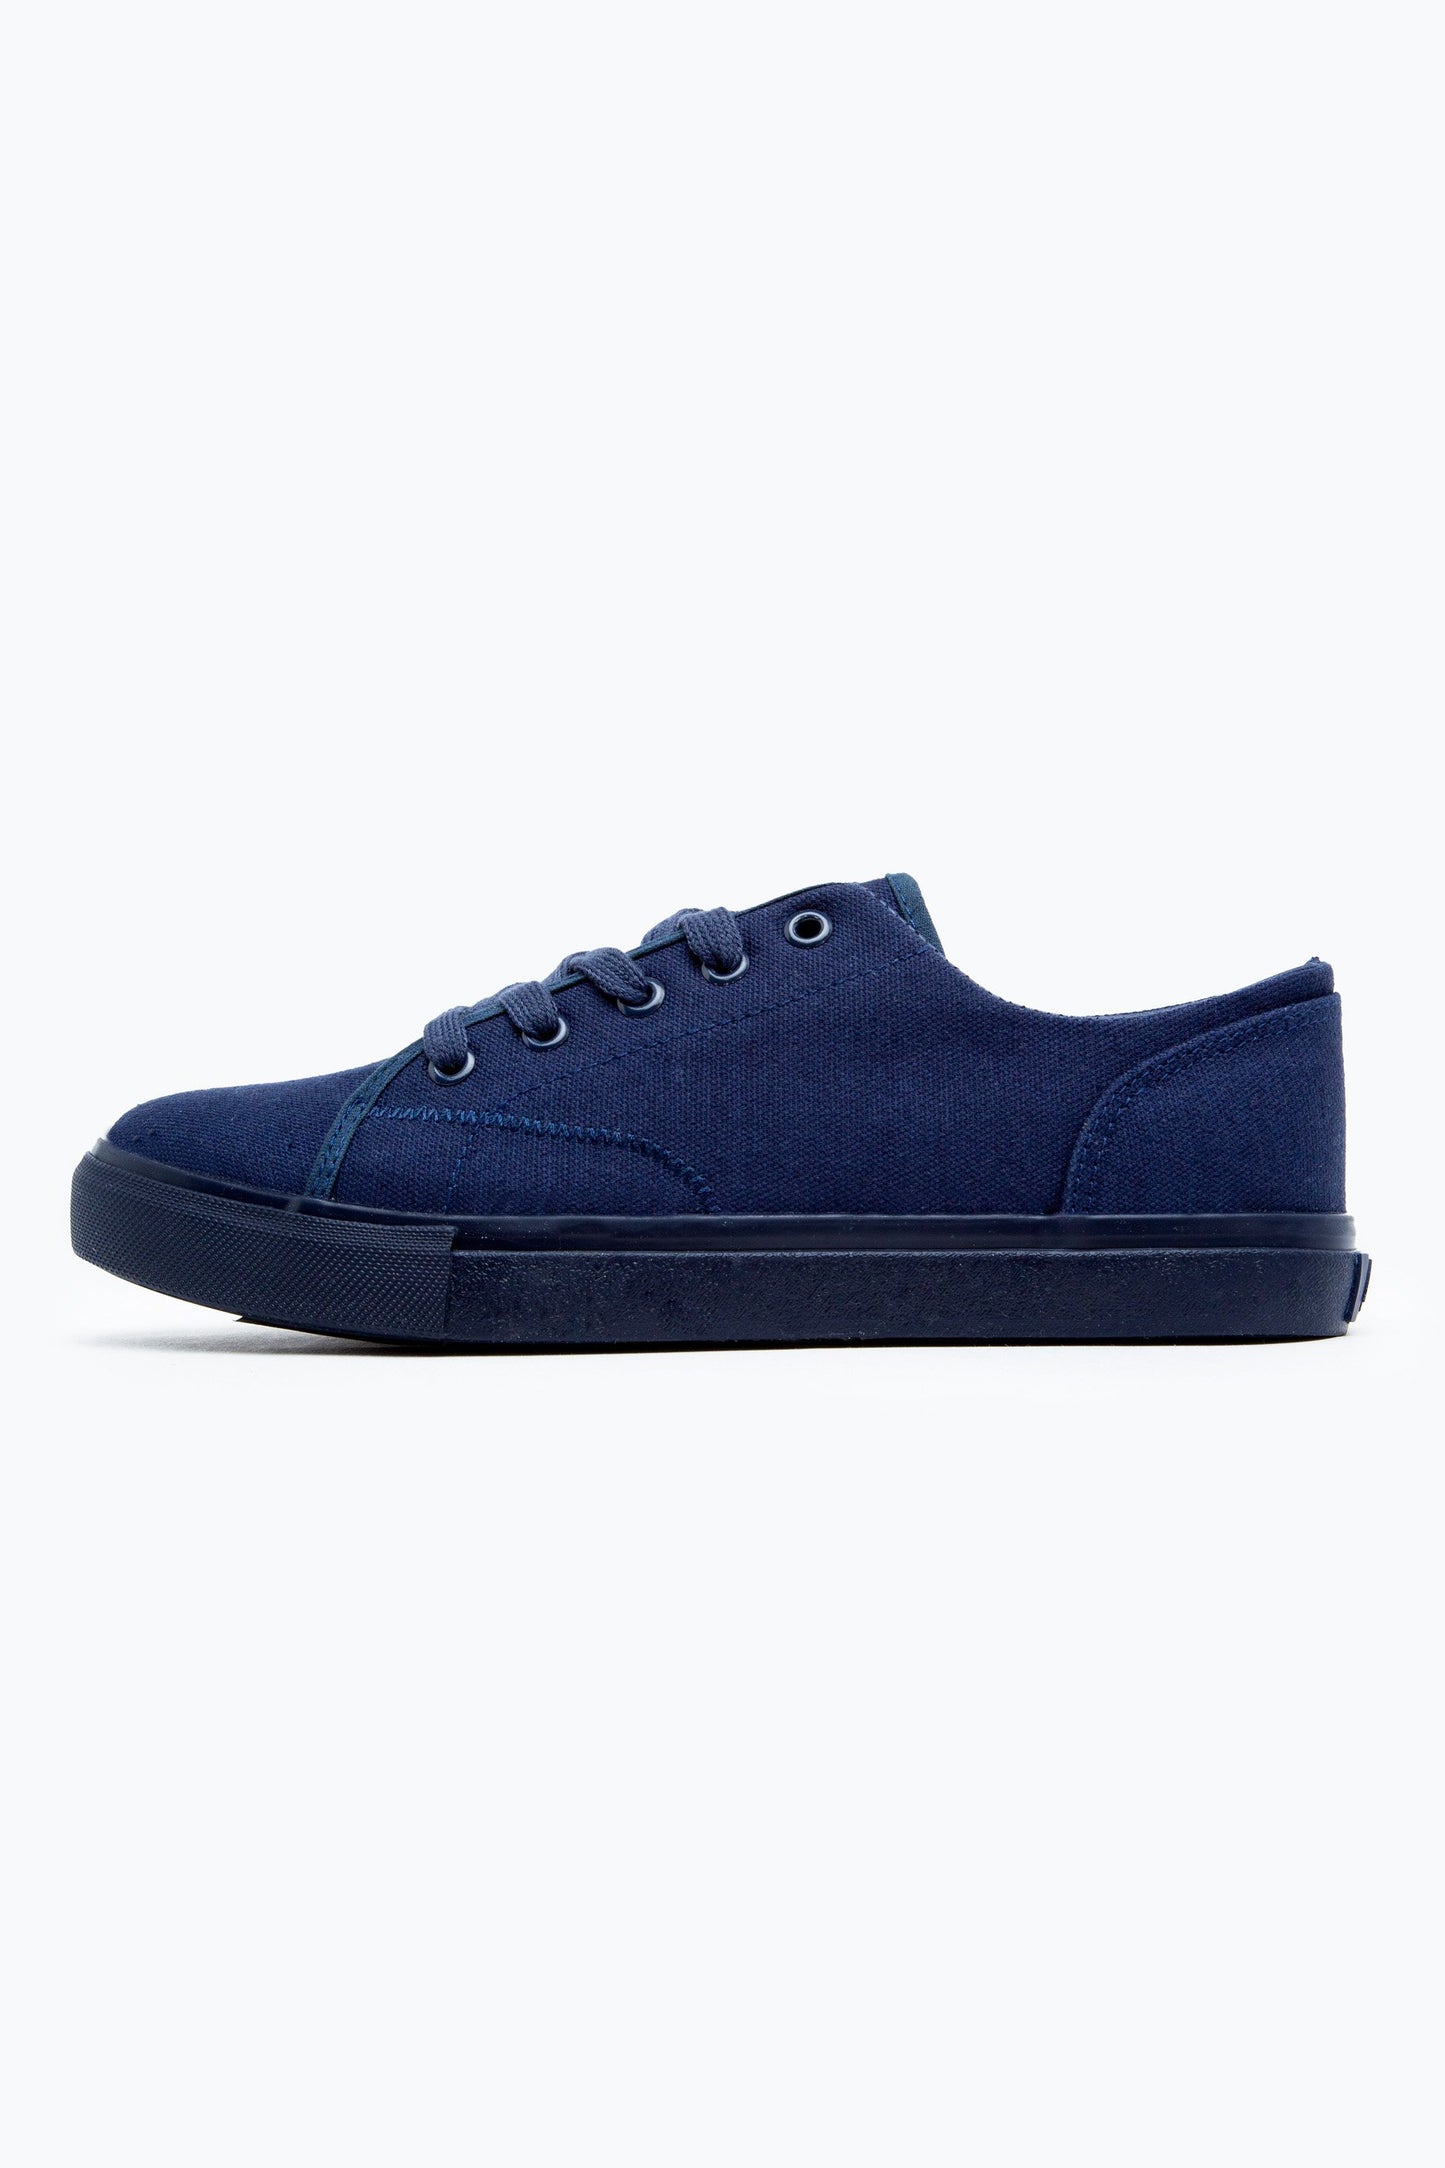 HYPE NAVY PUMP KIDS TRAINERS